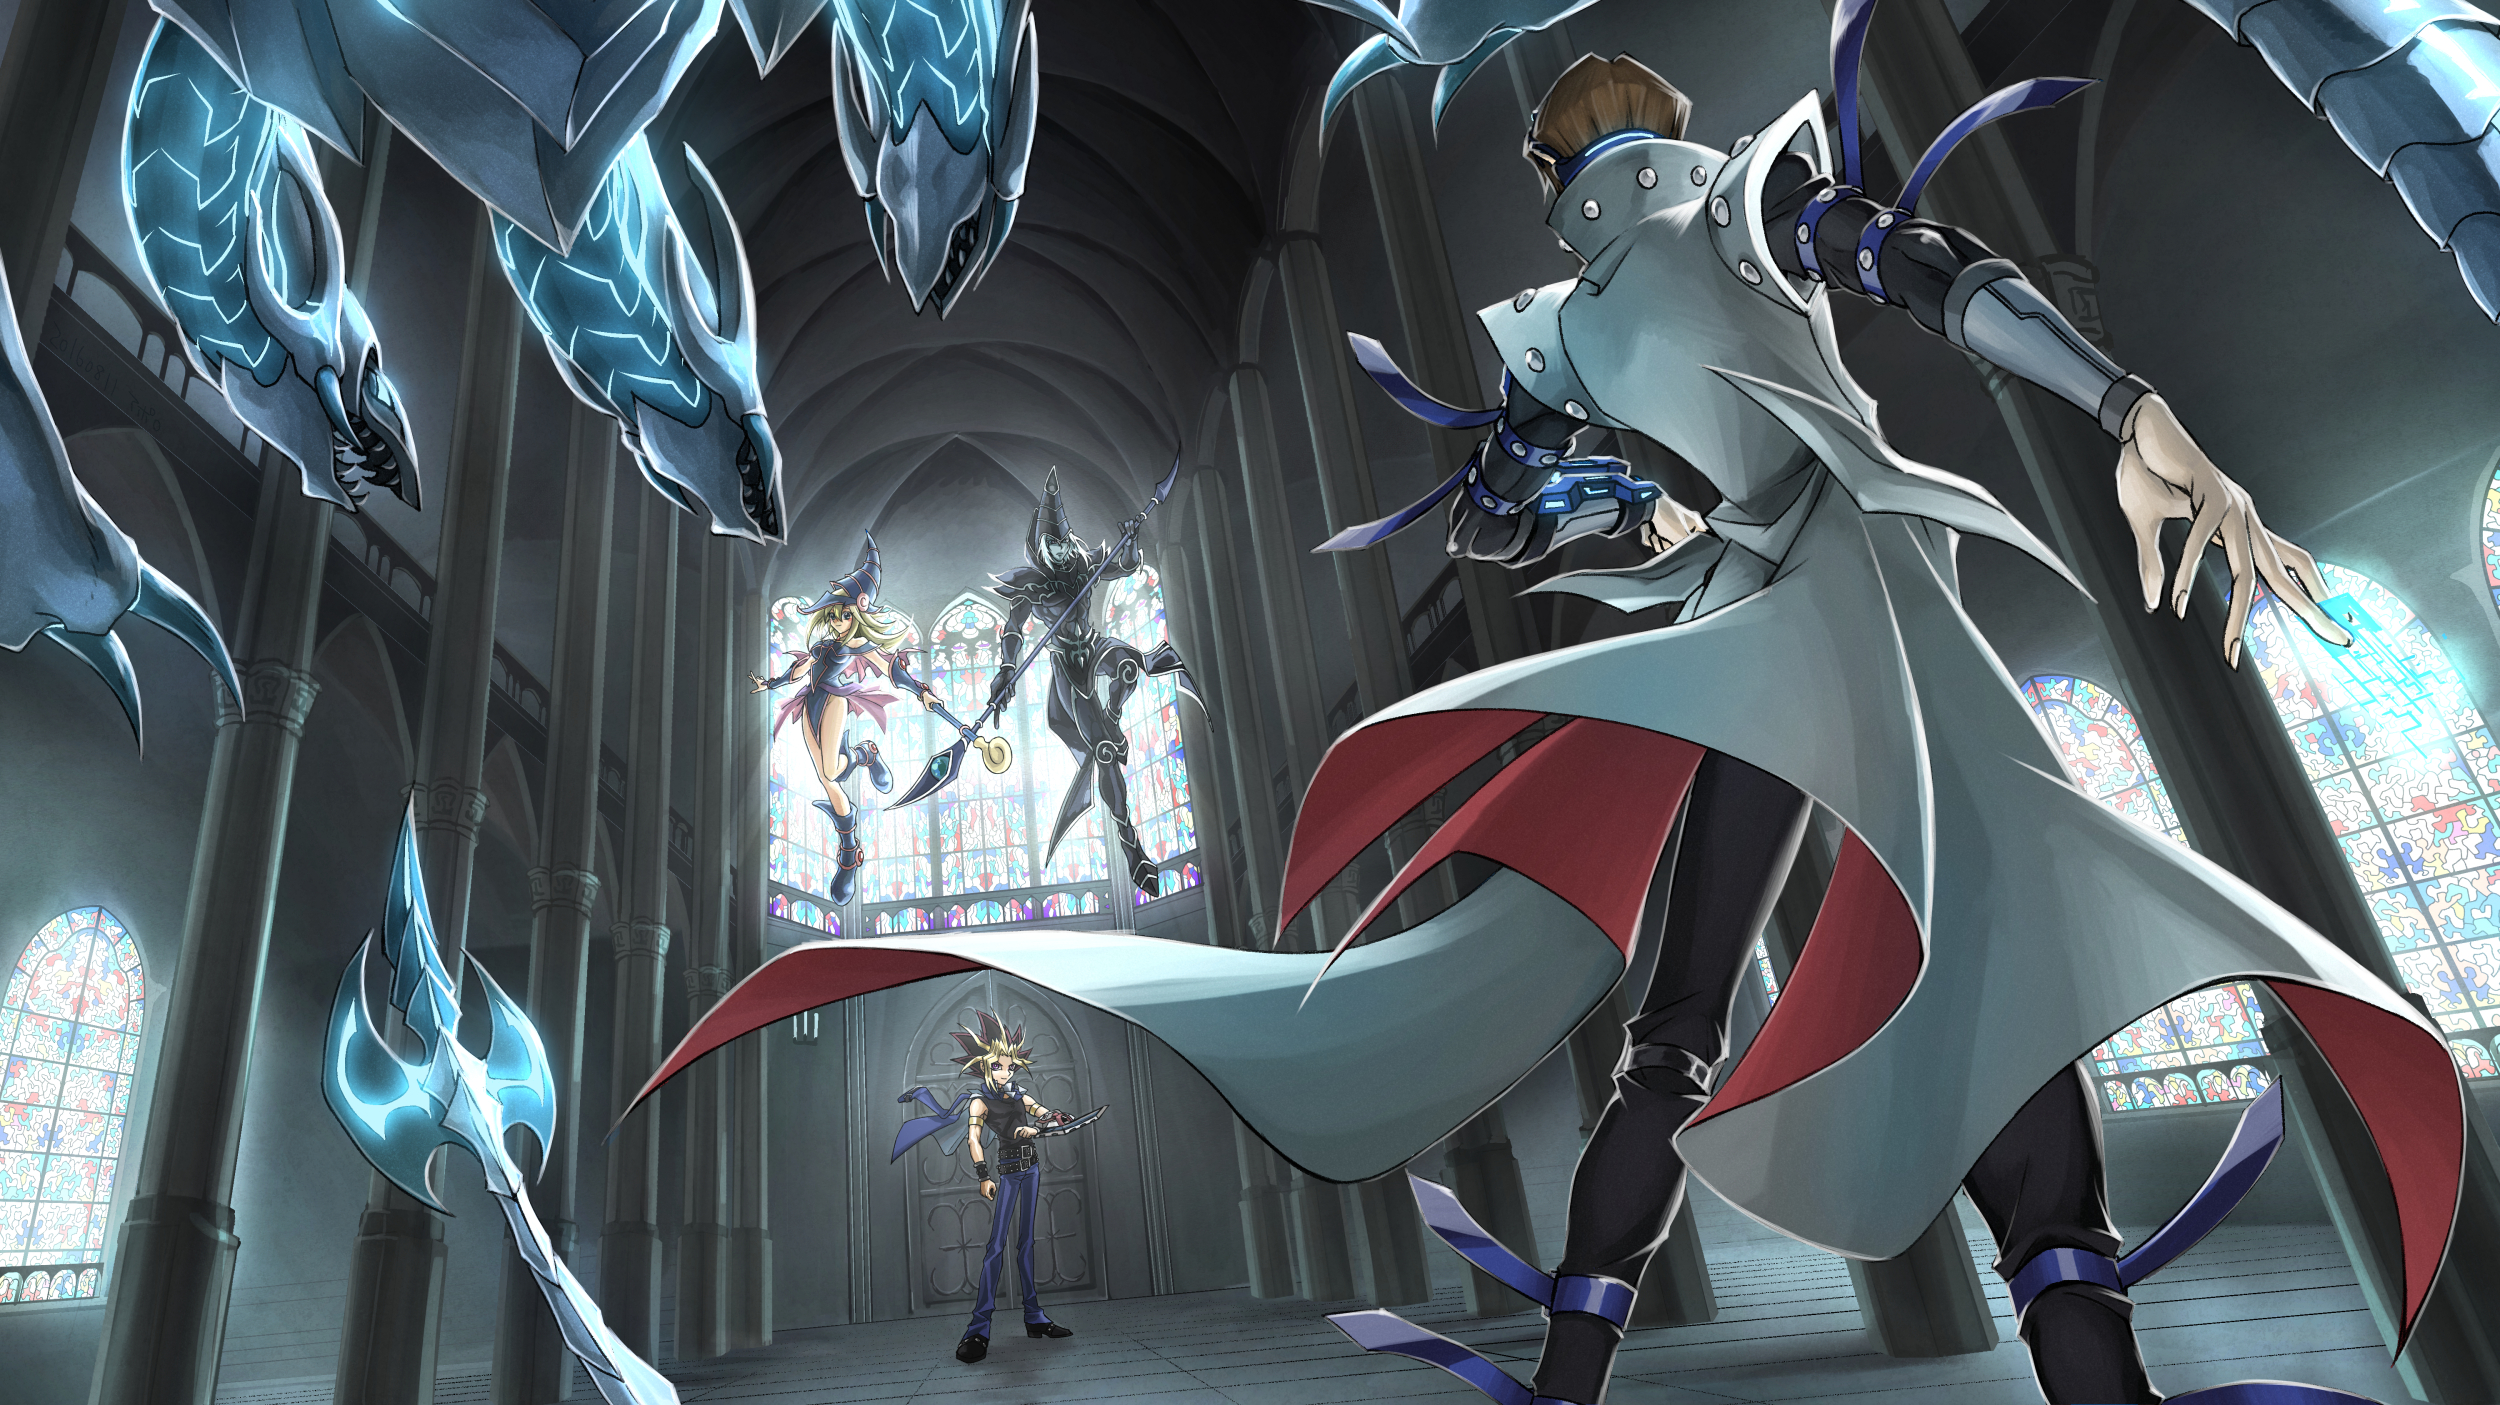 yugioh wallpaper,cg artwork,fictional character,dragon,games,massively multiplayer online role playing game